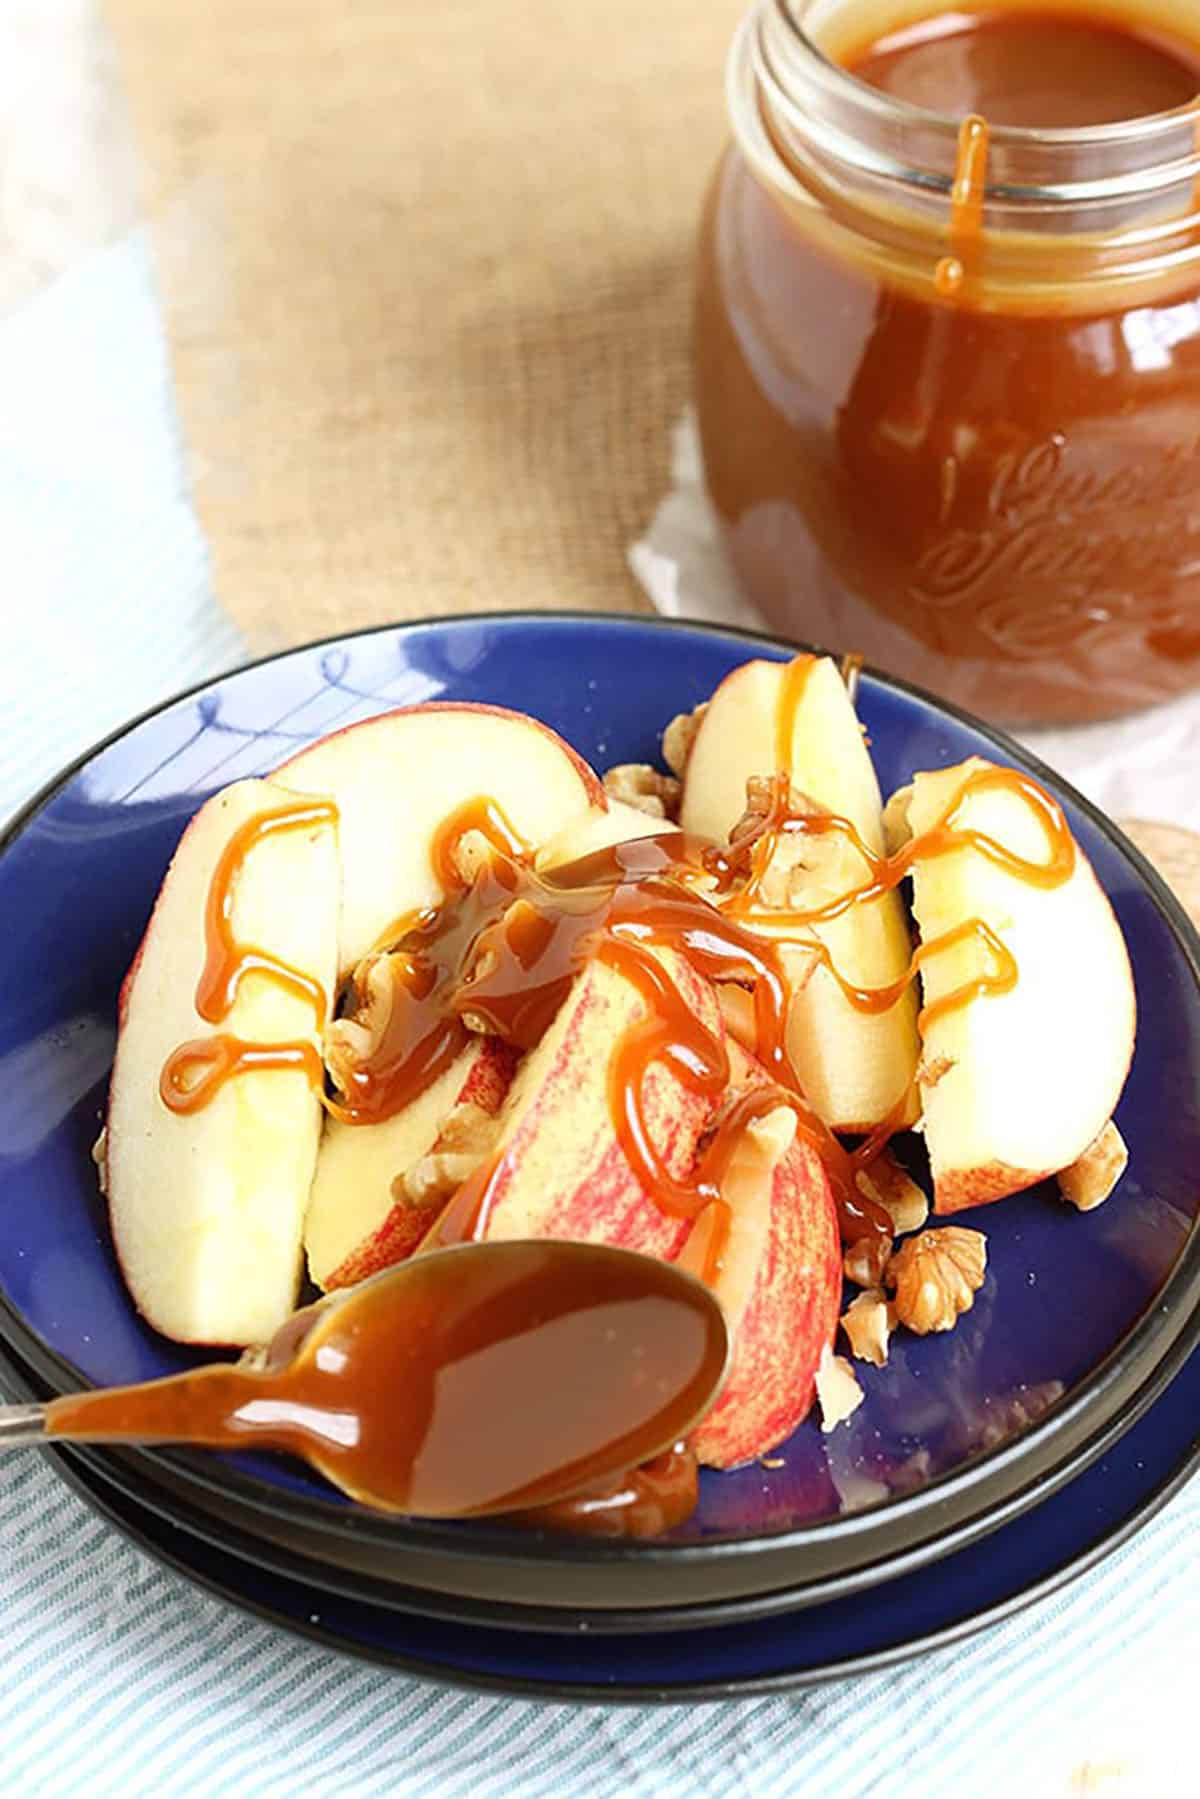 A plate with sliced apples drizzled with caramel sauce